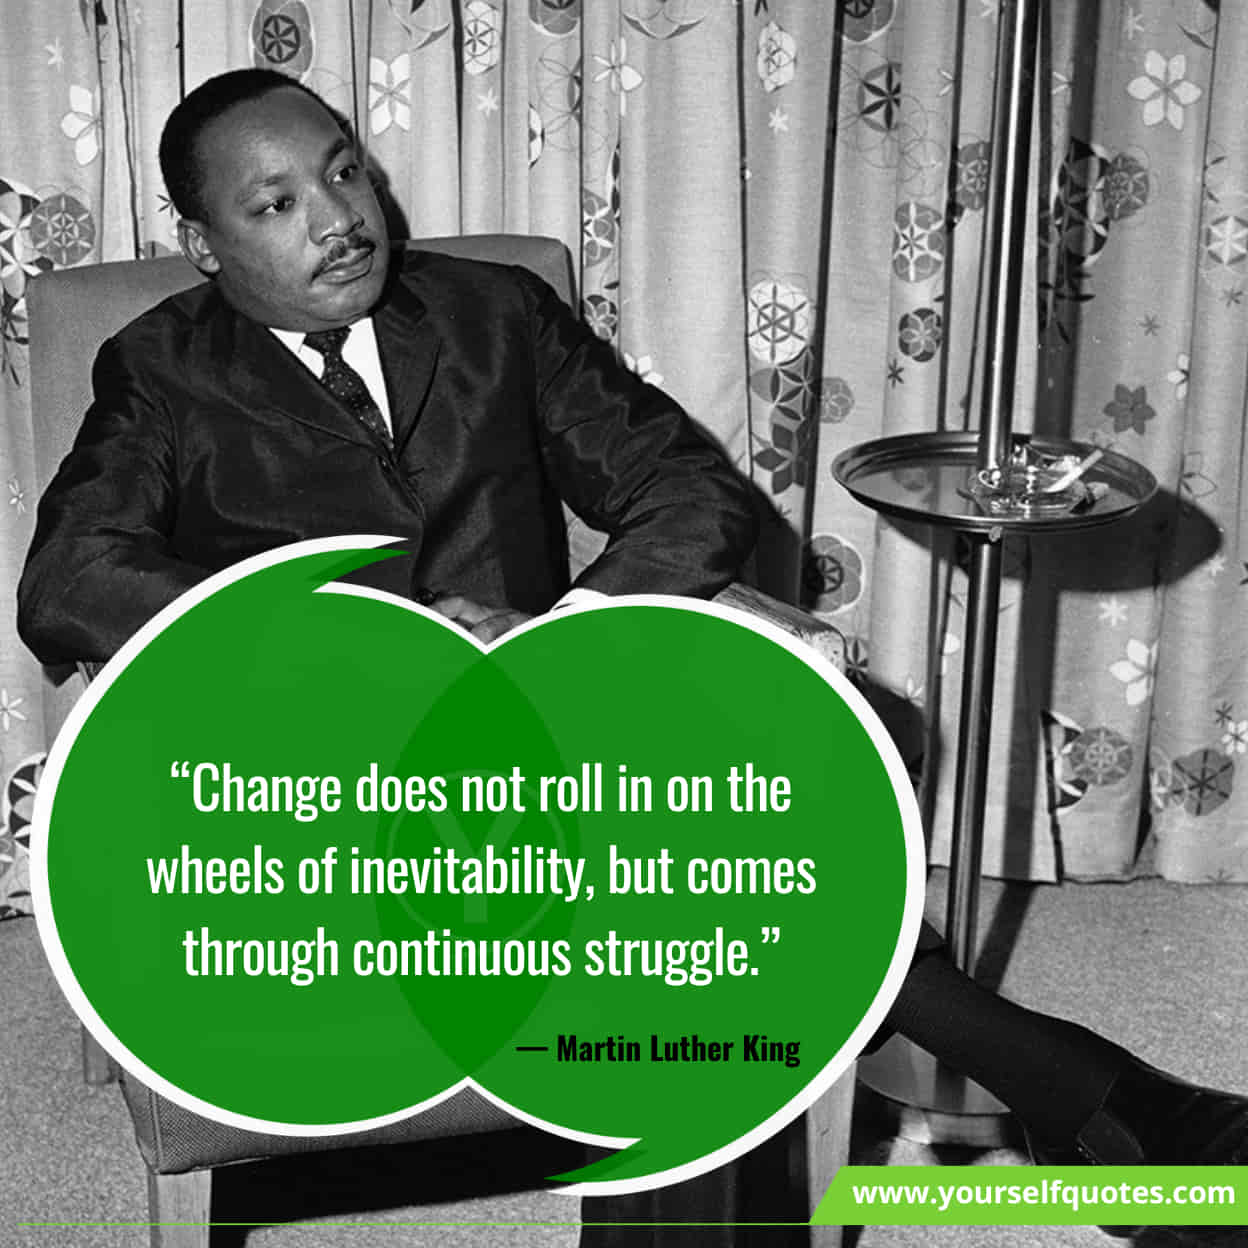 Martin Luther King, Jr. Quotes On Forgiveness